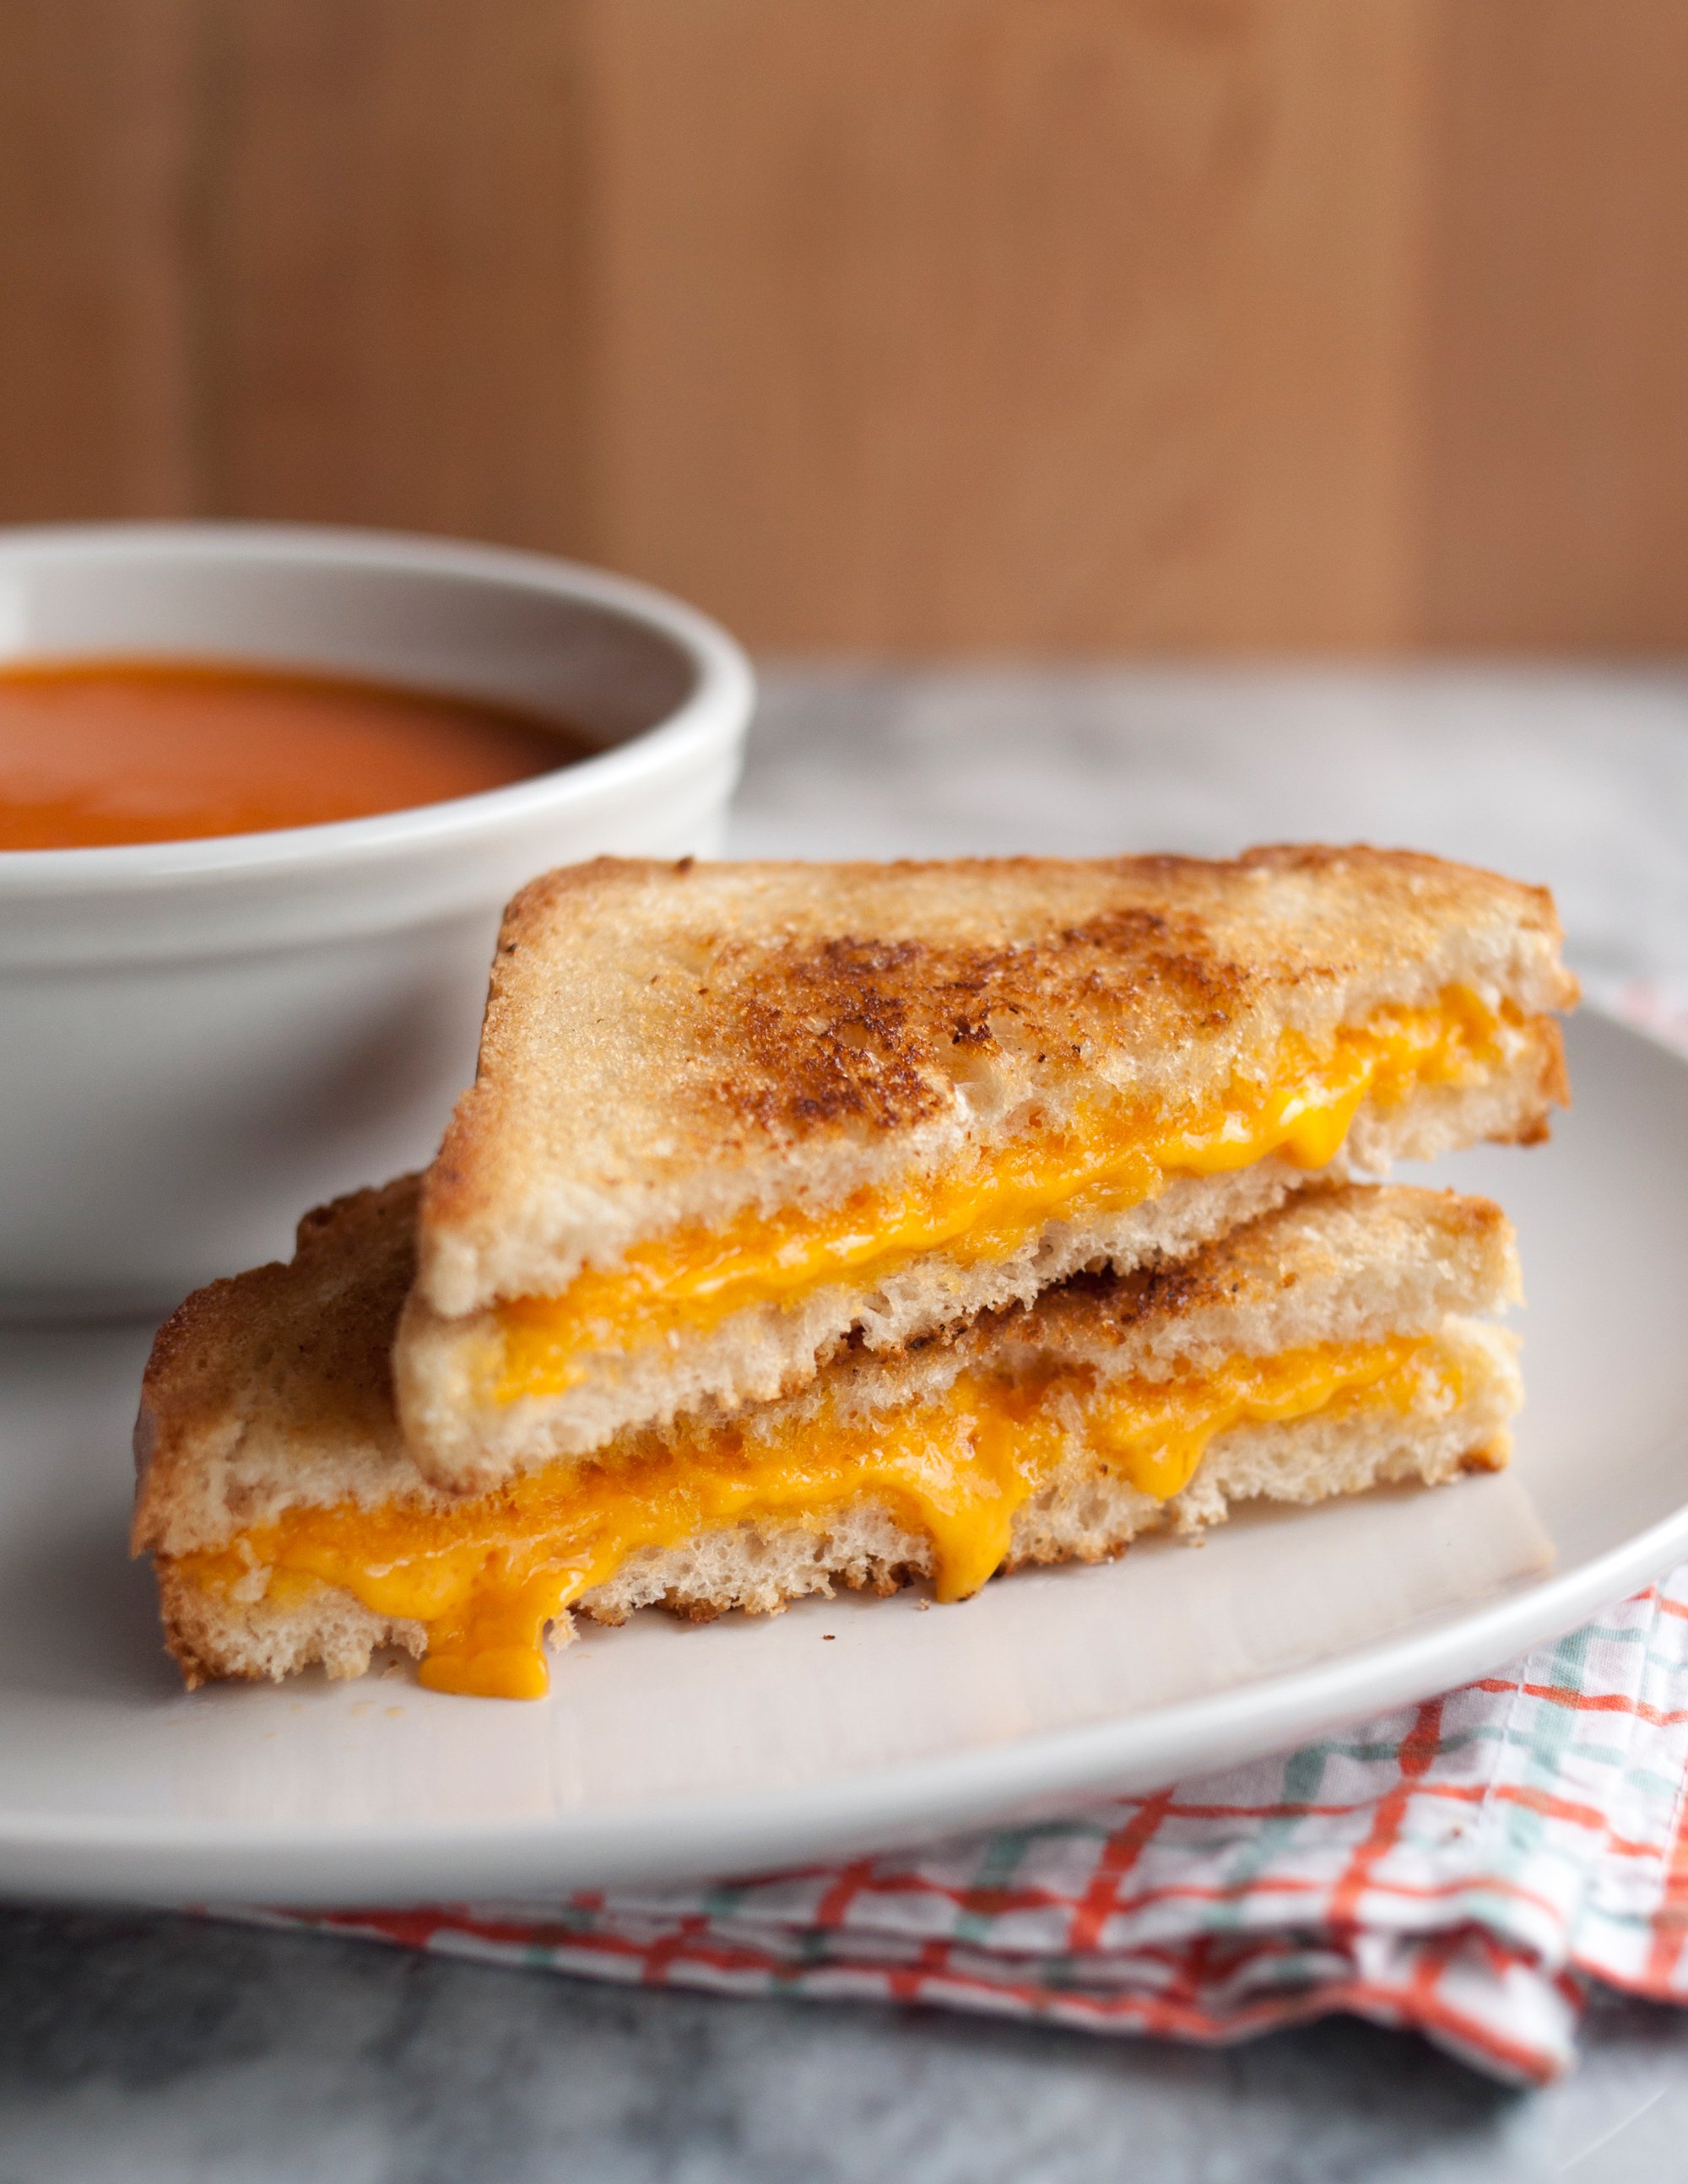 Want the Perfect Grilled Cheese Sandwich? Put a Lid On It!